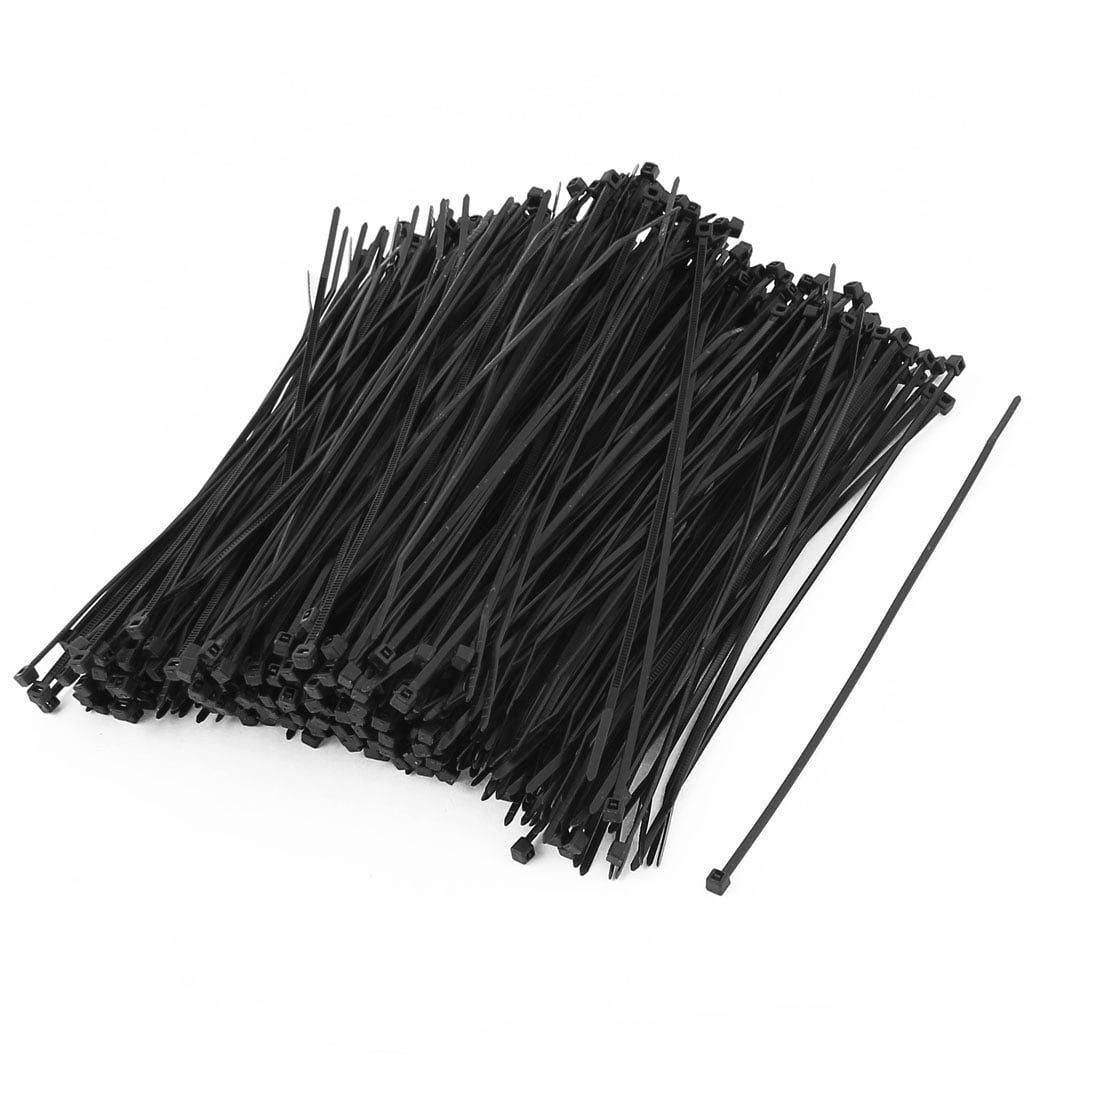 Black White Cable Ties Wraps Nylon Strong Long Zip Tie 4mm x 300mm 20kg Tensile 